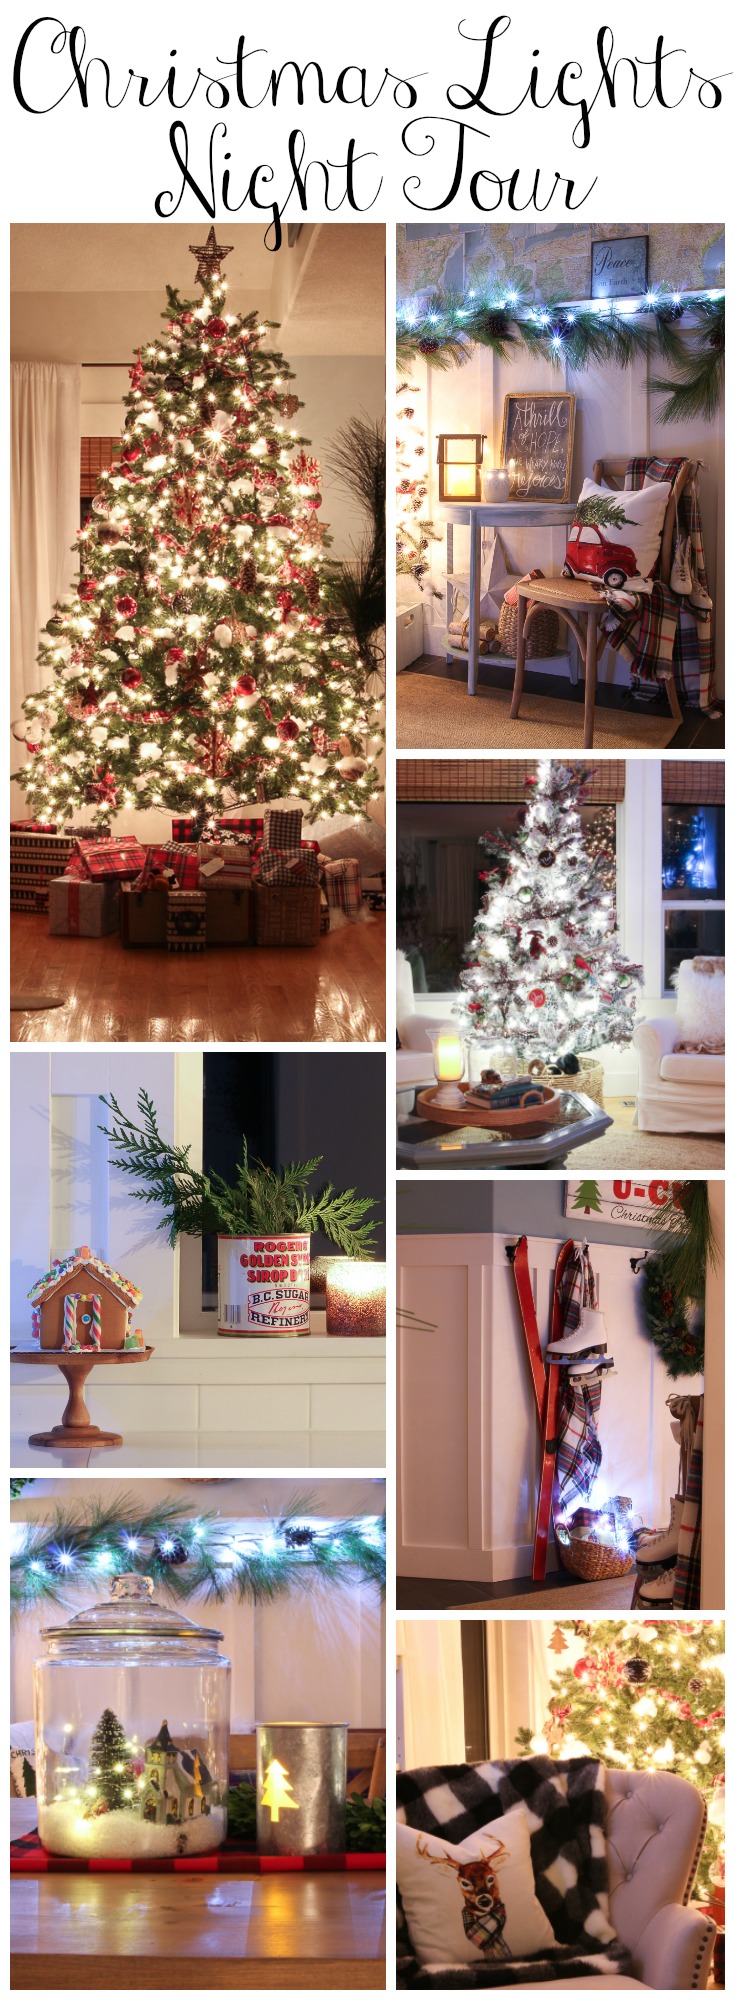 christmas-lights-night-tour-all-kinds-of-twinkly-and-pretty-holiday-inspiration